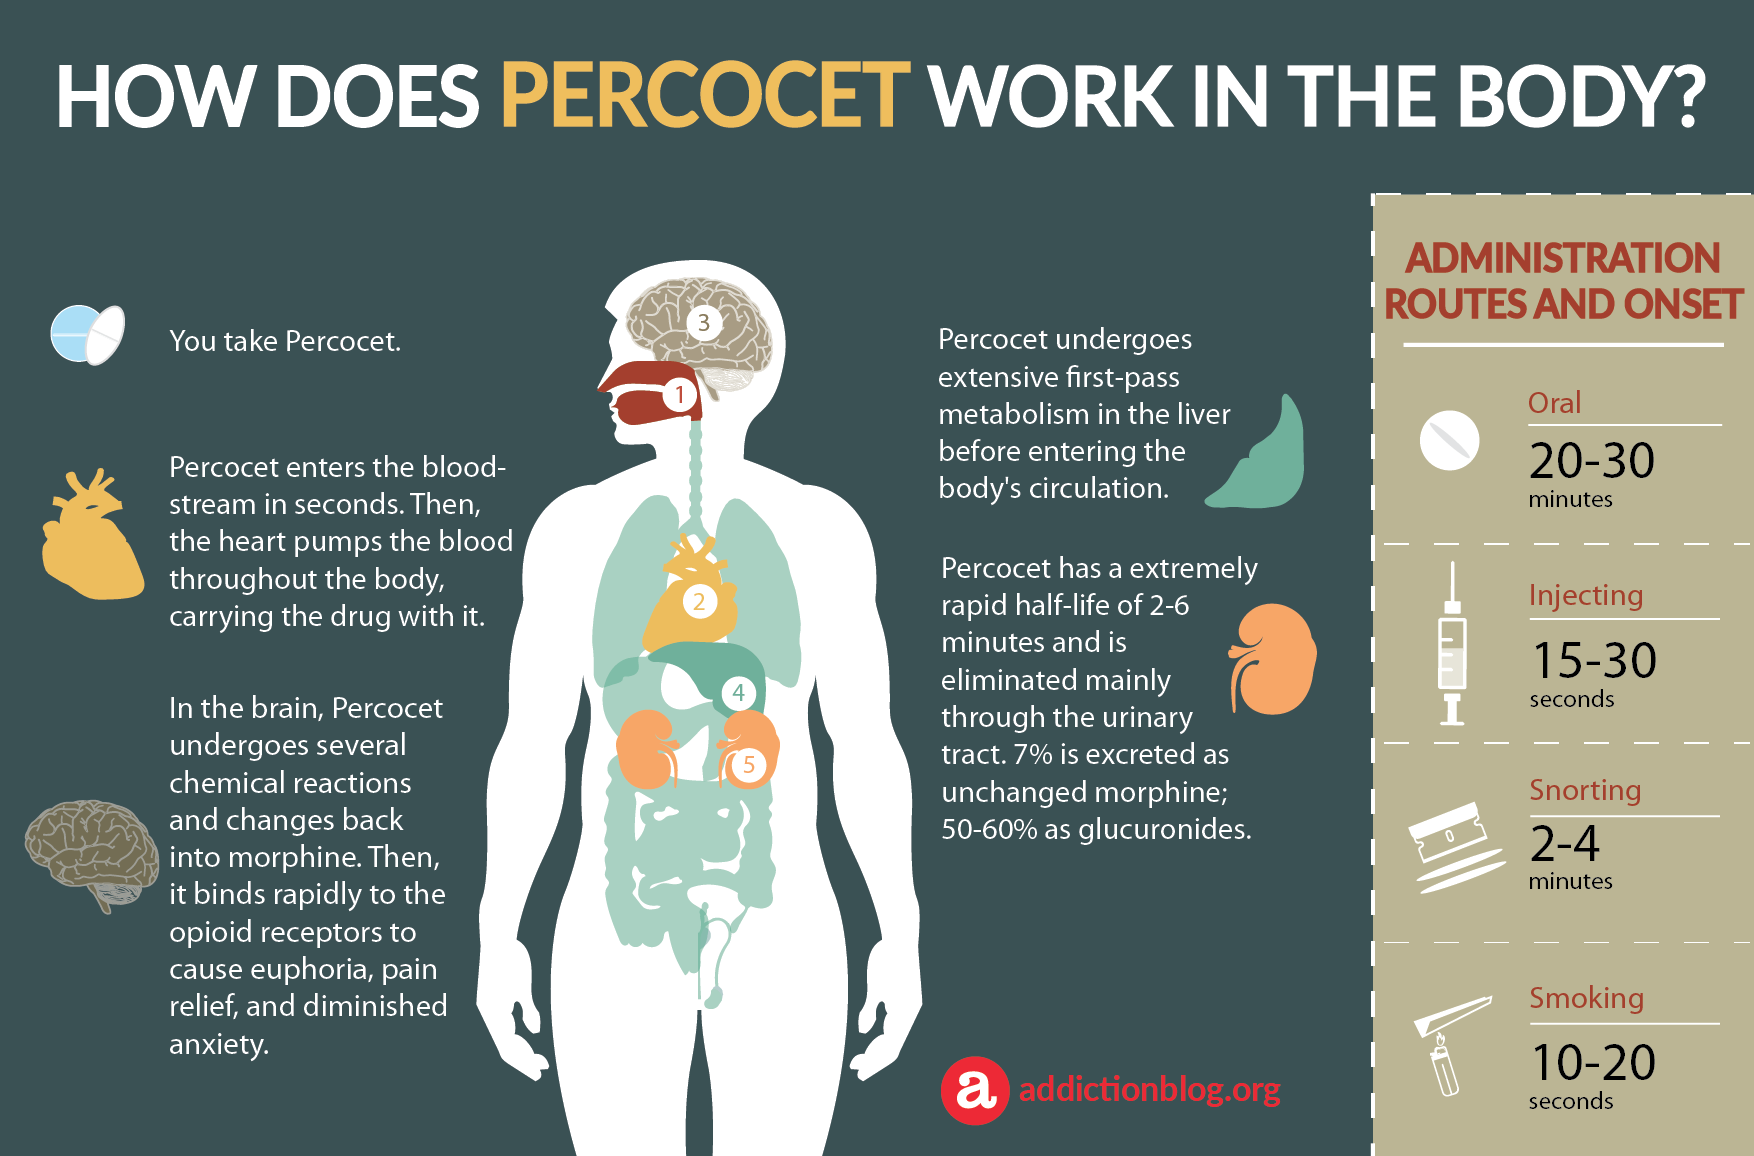 How Does Percocet Metabolize and Work in the Body? (INFORGPRAPHIC)